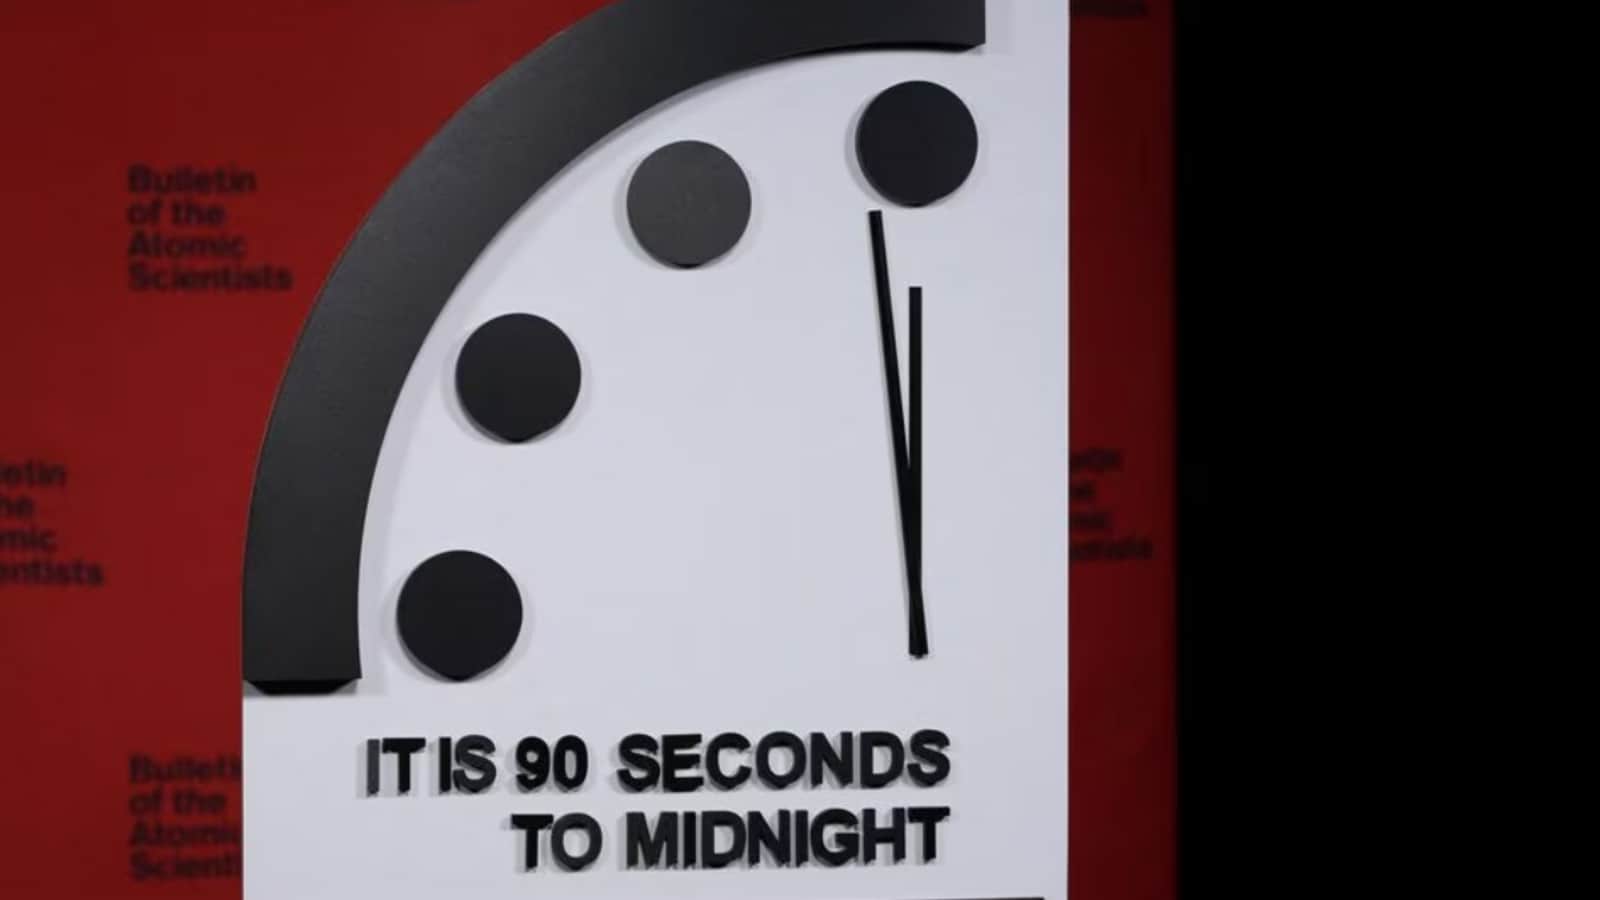 The Doomsday clock is at 90 seconds to midnight - how close are we to catastrophe? Explained